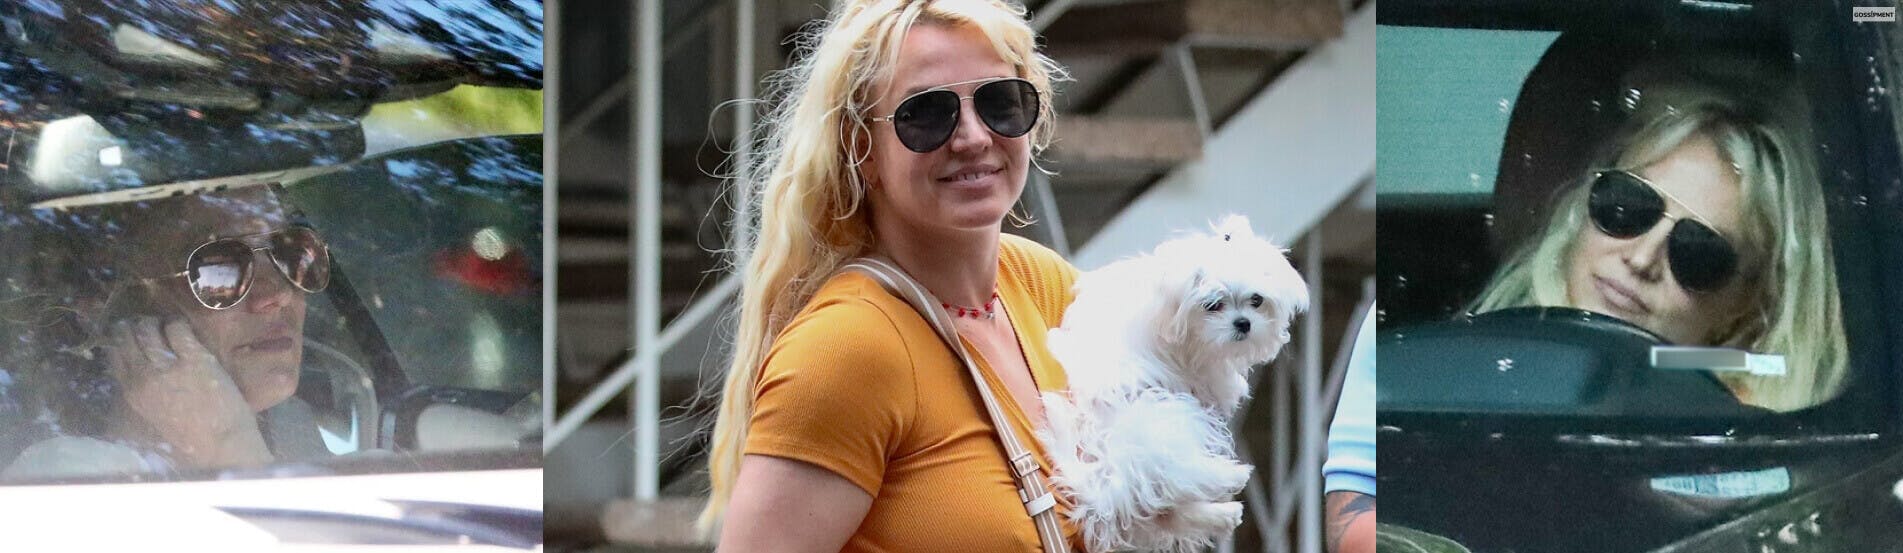 Cover Image for Britney Spears Steps Out For The First Time Since Release Of Her Bombshell Memoir